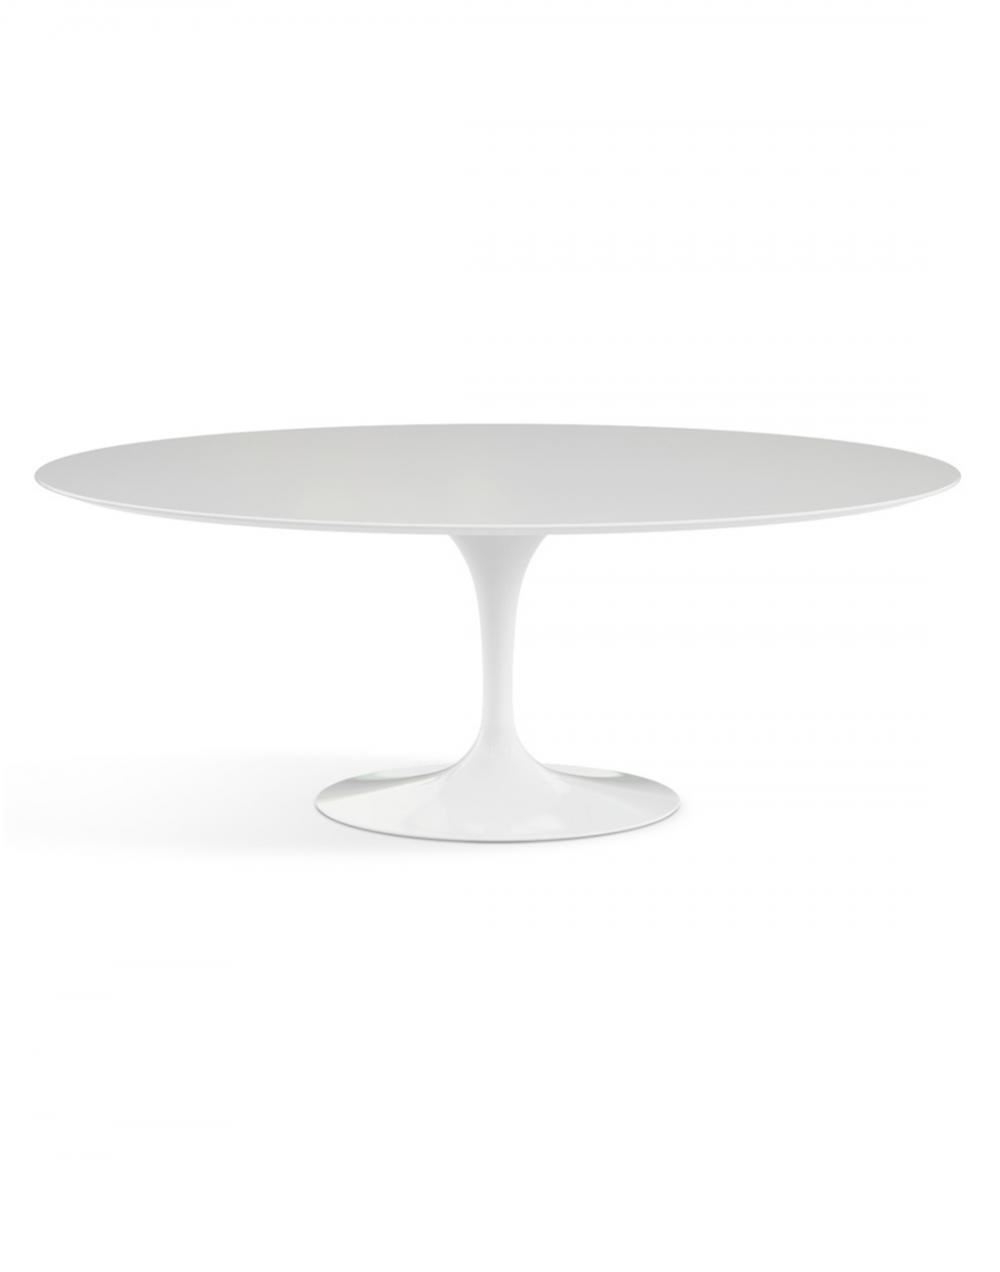 Saarinen Dining Table Oval White Base White Laminated Top